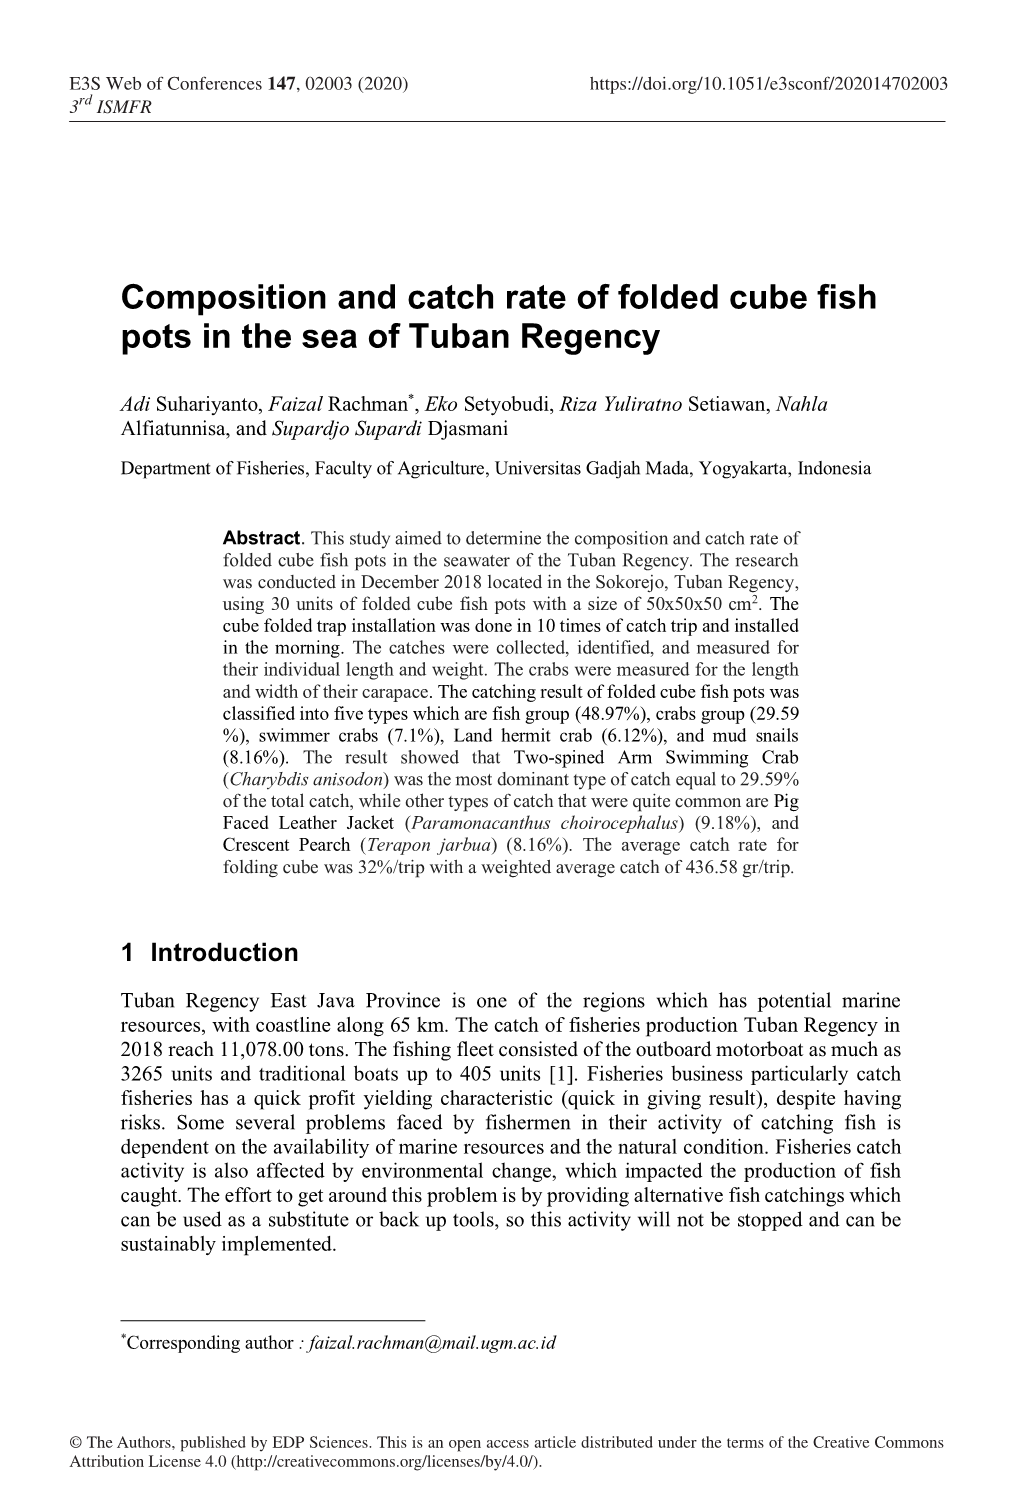 Composition and Catch Rate of Folded Cube Fish Pots in the Sea of Tuban Regency